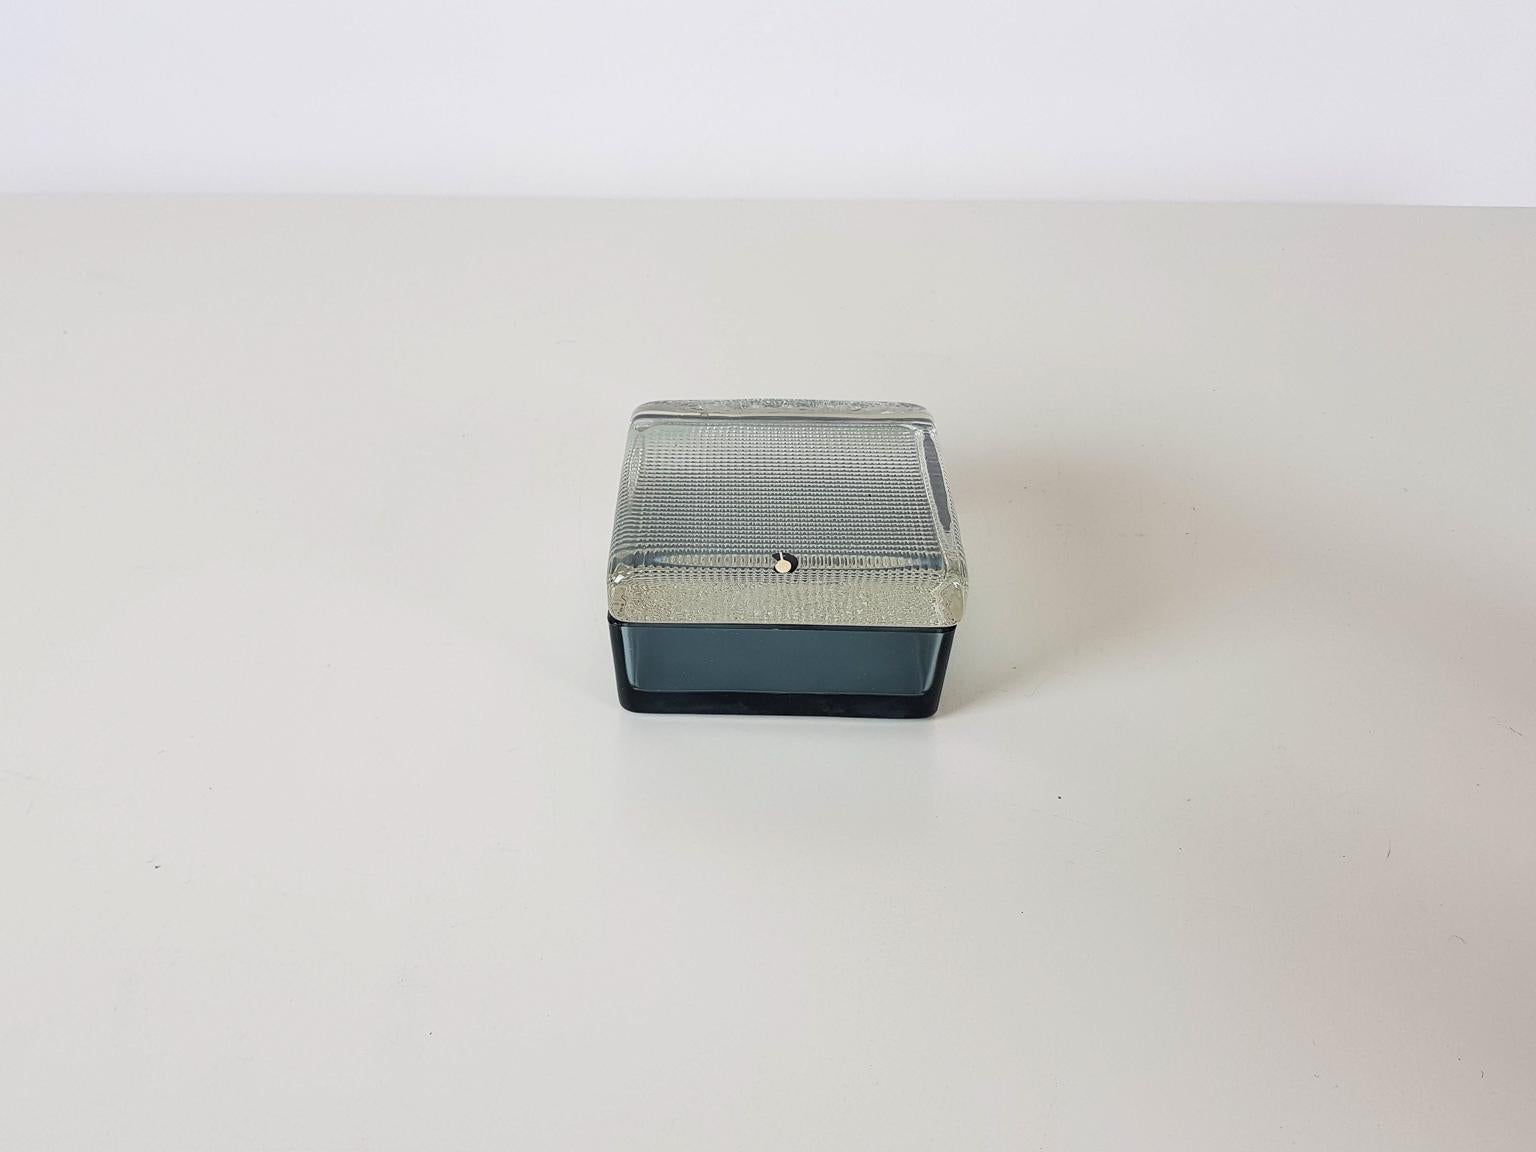 Two-tone glass decorative box by Tapio Wirkkala for Iittala from Scandivania, Finland. Made and designed in the 1960s.

Vintage example. In good condition. Marked by maker with original sticker. Free delivery on this item to certain